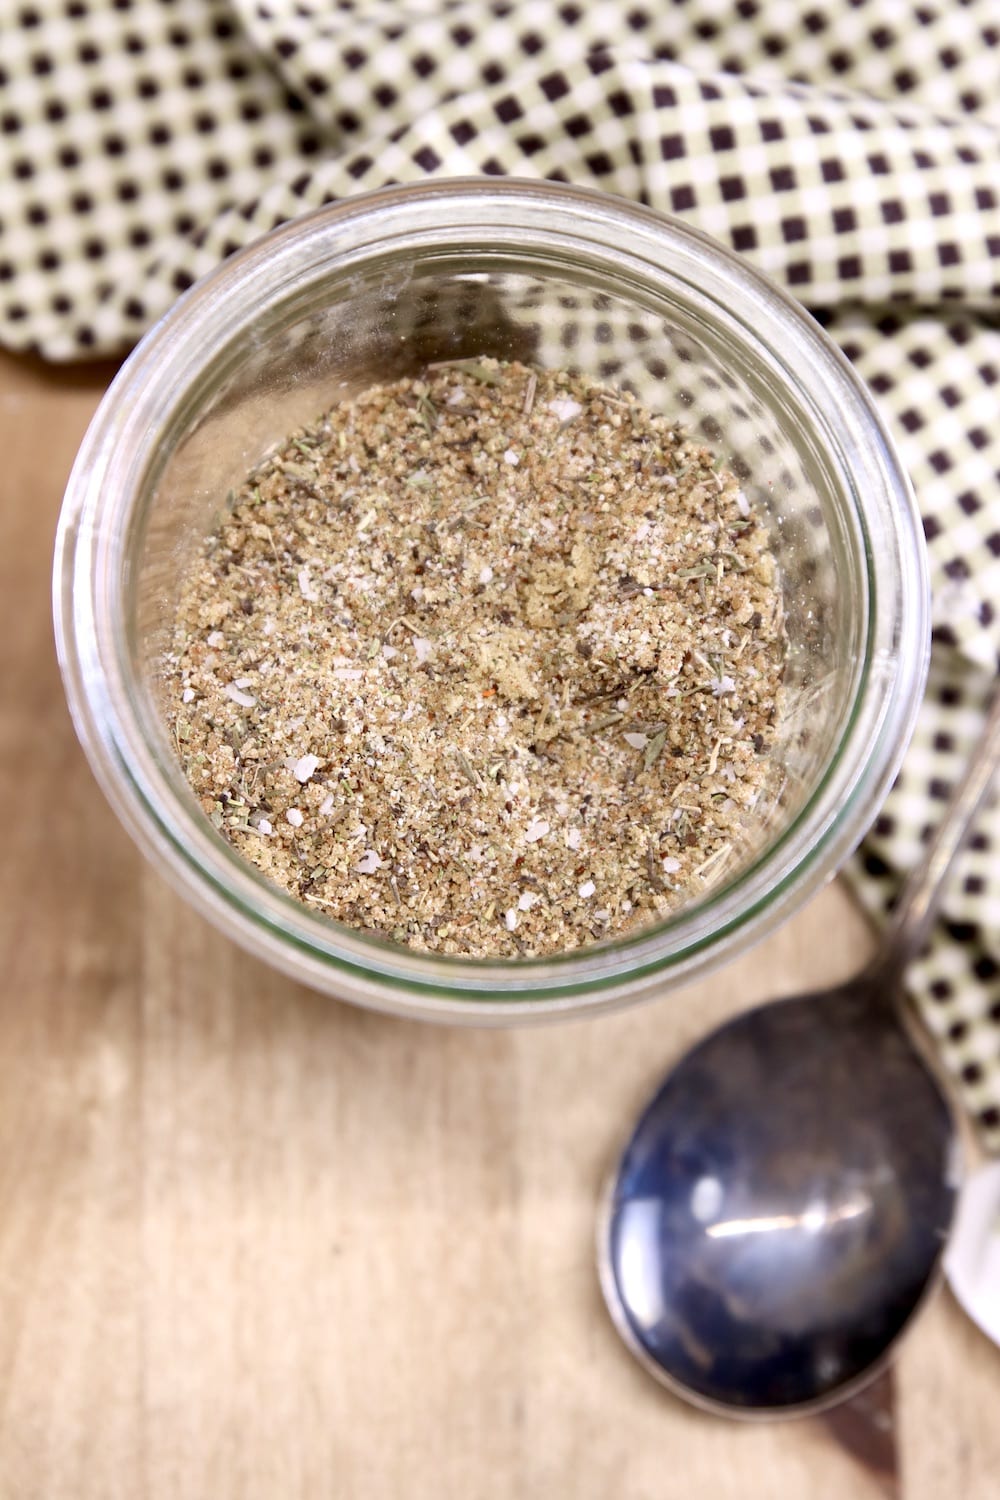 Jar of spice rub with a spoon and check napkin